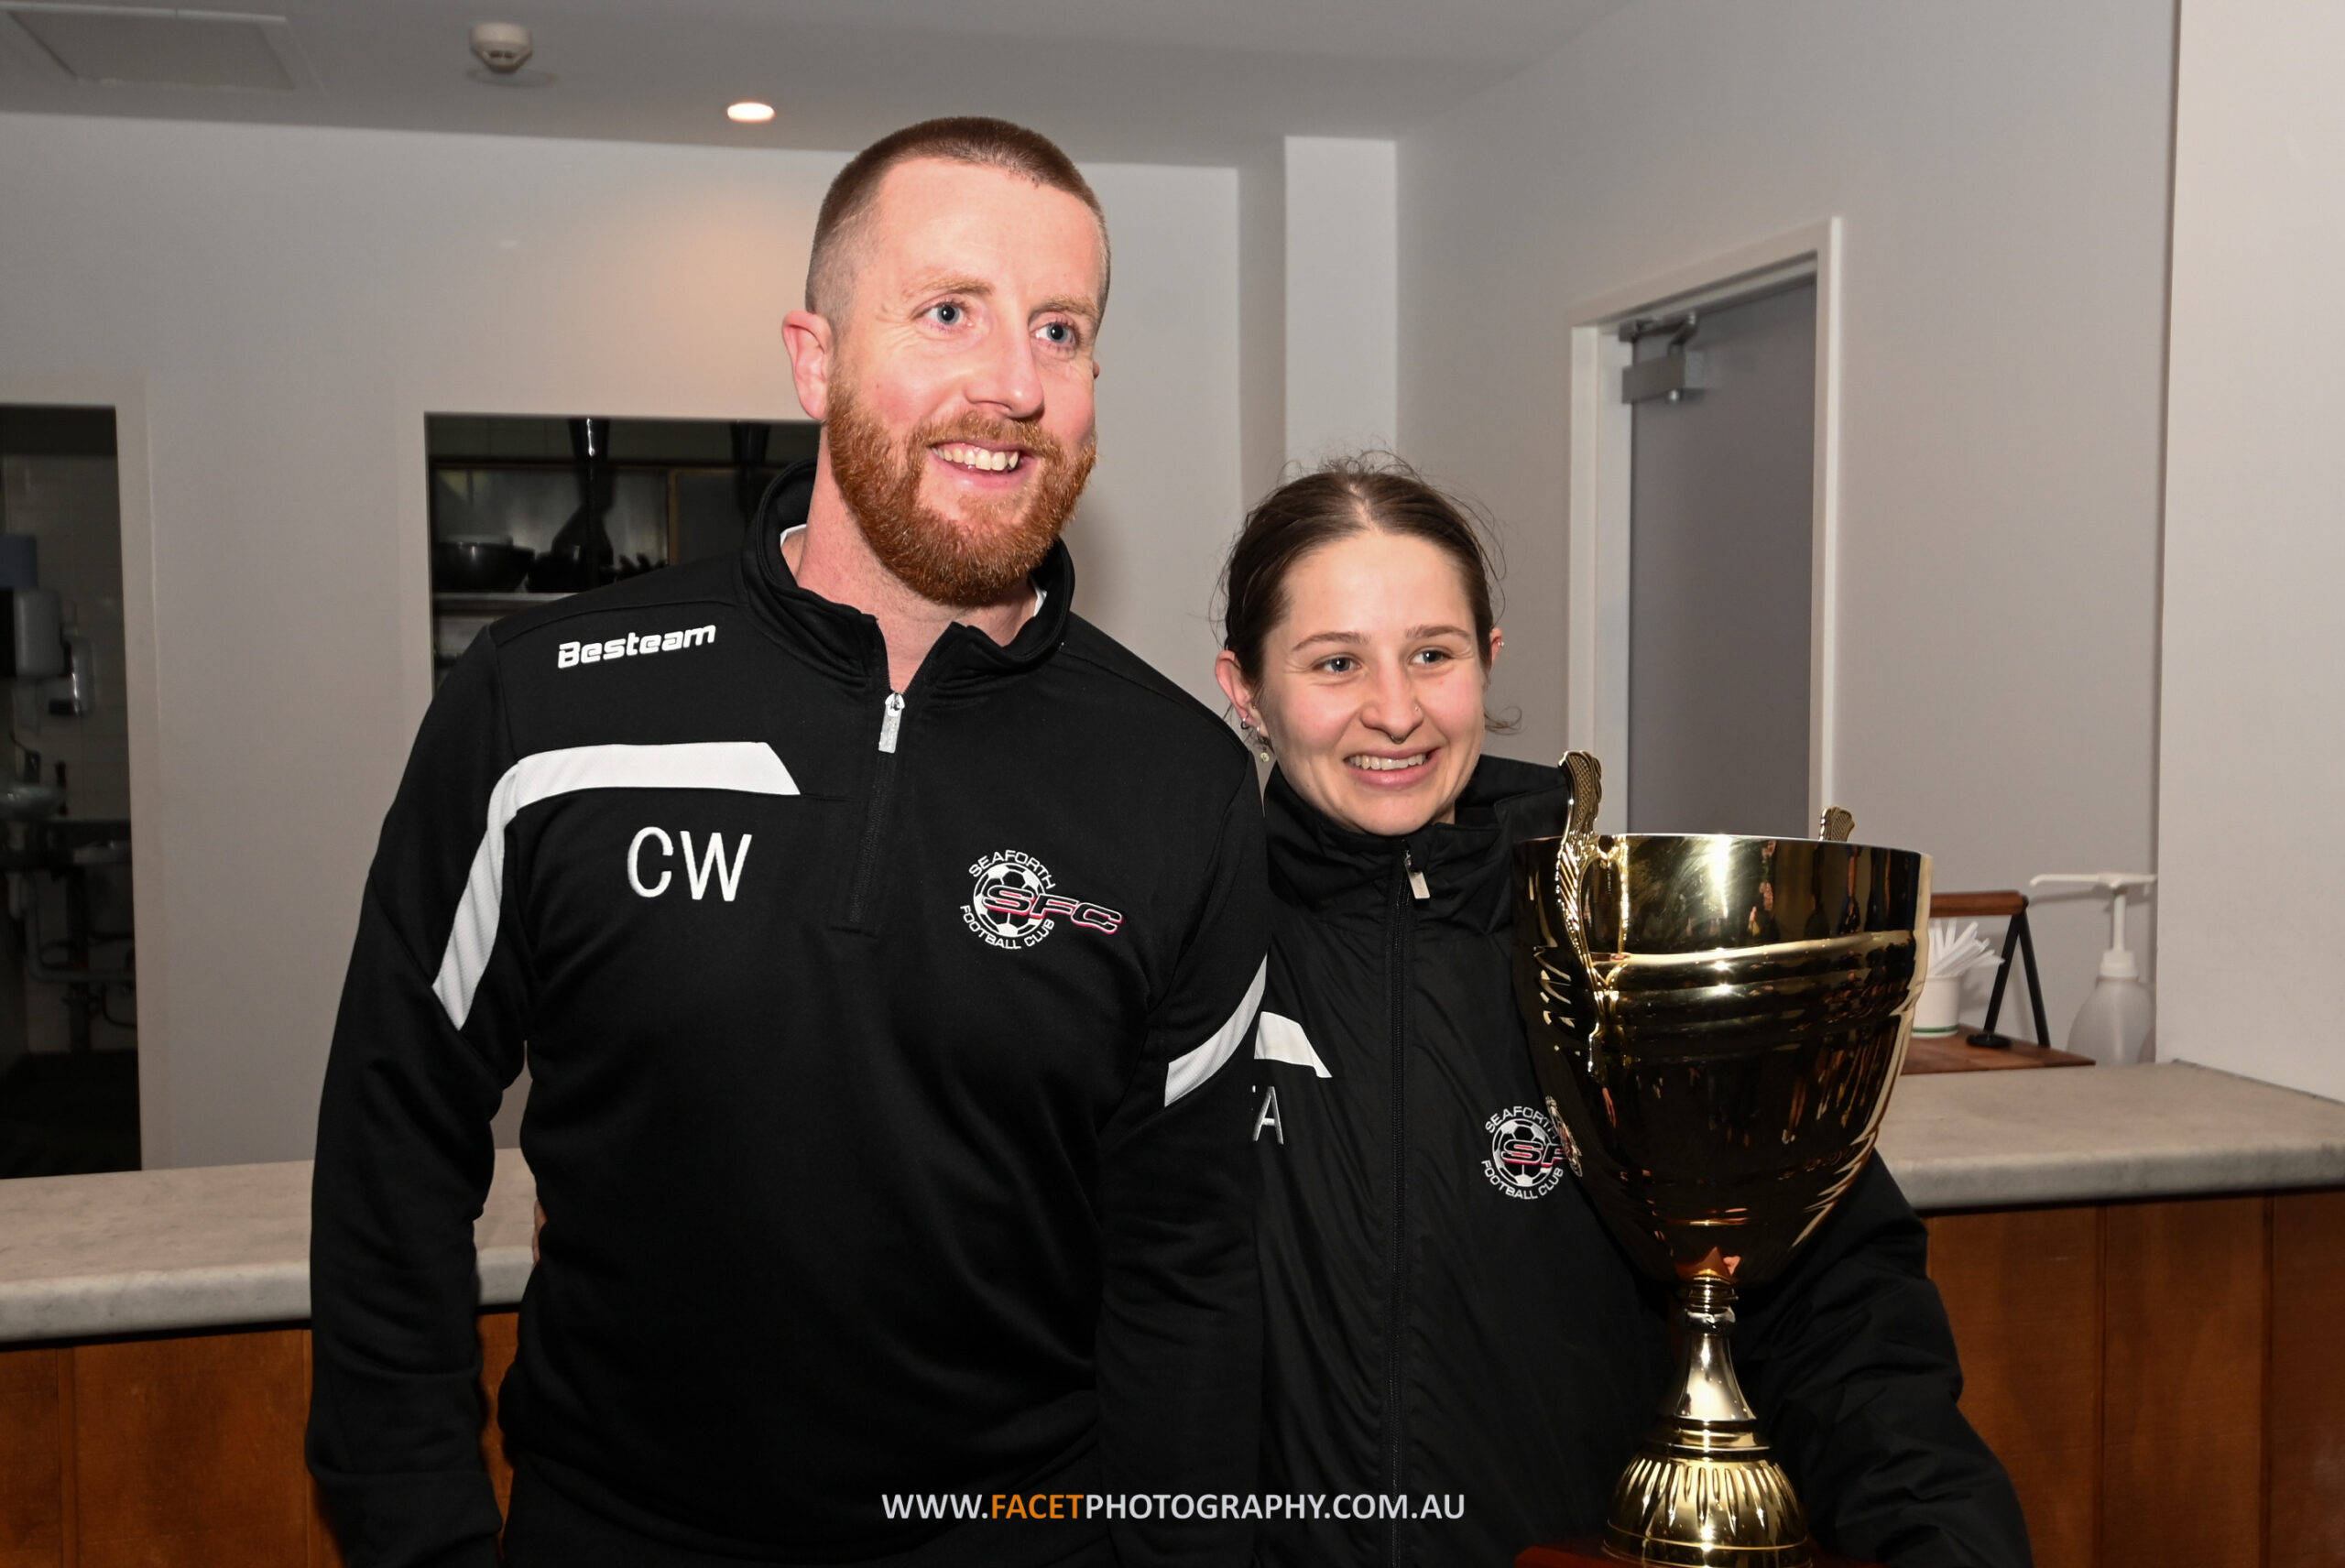 Seaforth Women's Premier League head coach Chris Wood is pictured with the MWFA Challenge Cup trophy after winning the 2022 Final. Photo credit: Jeremy Denham